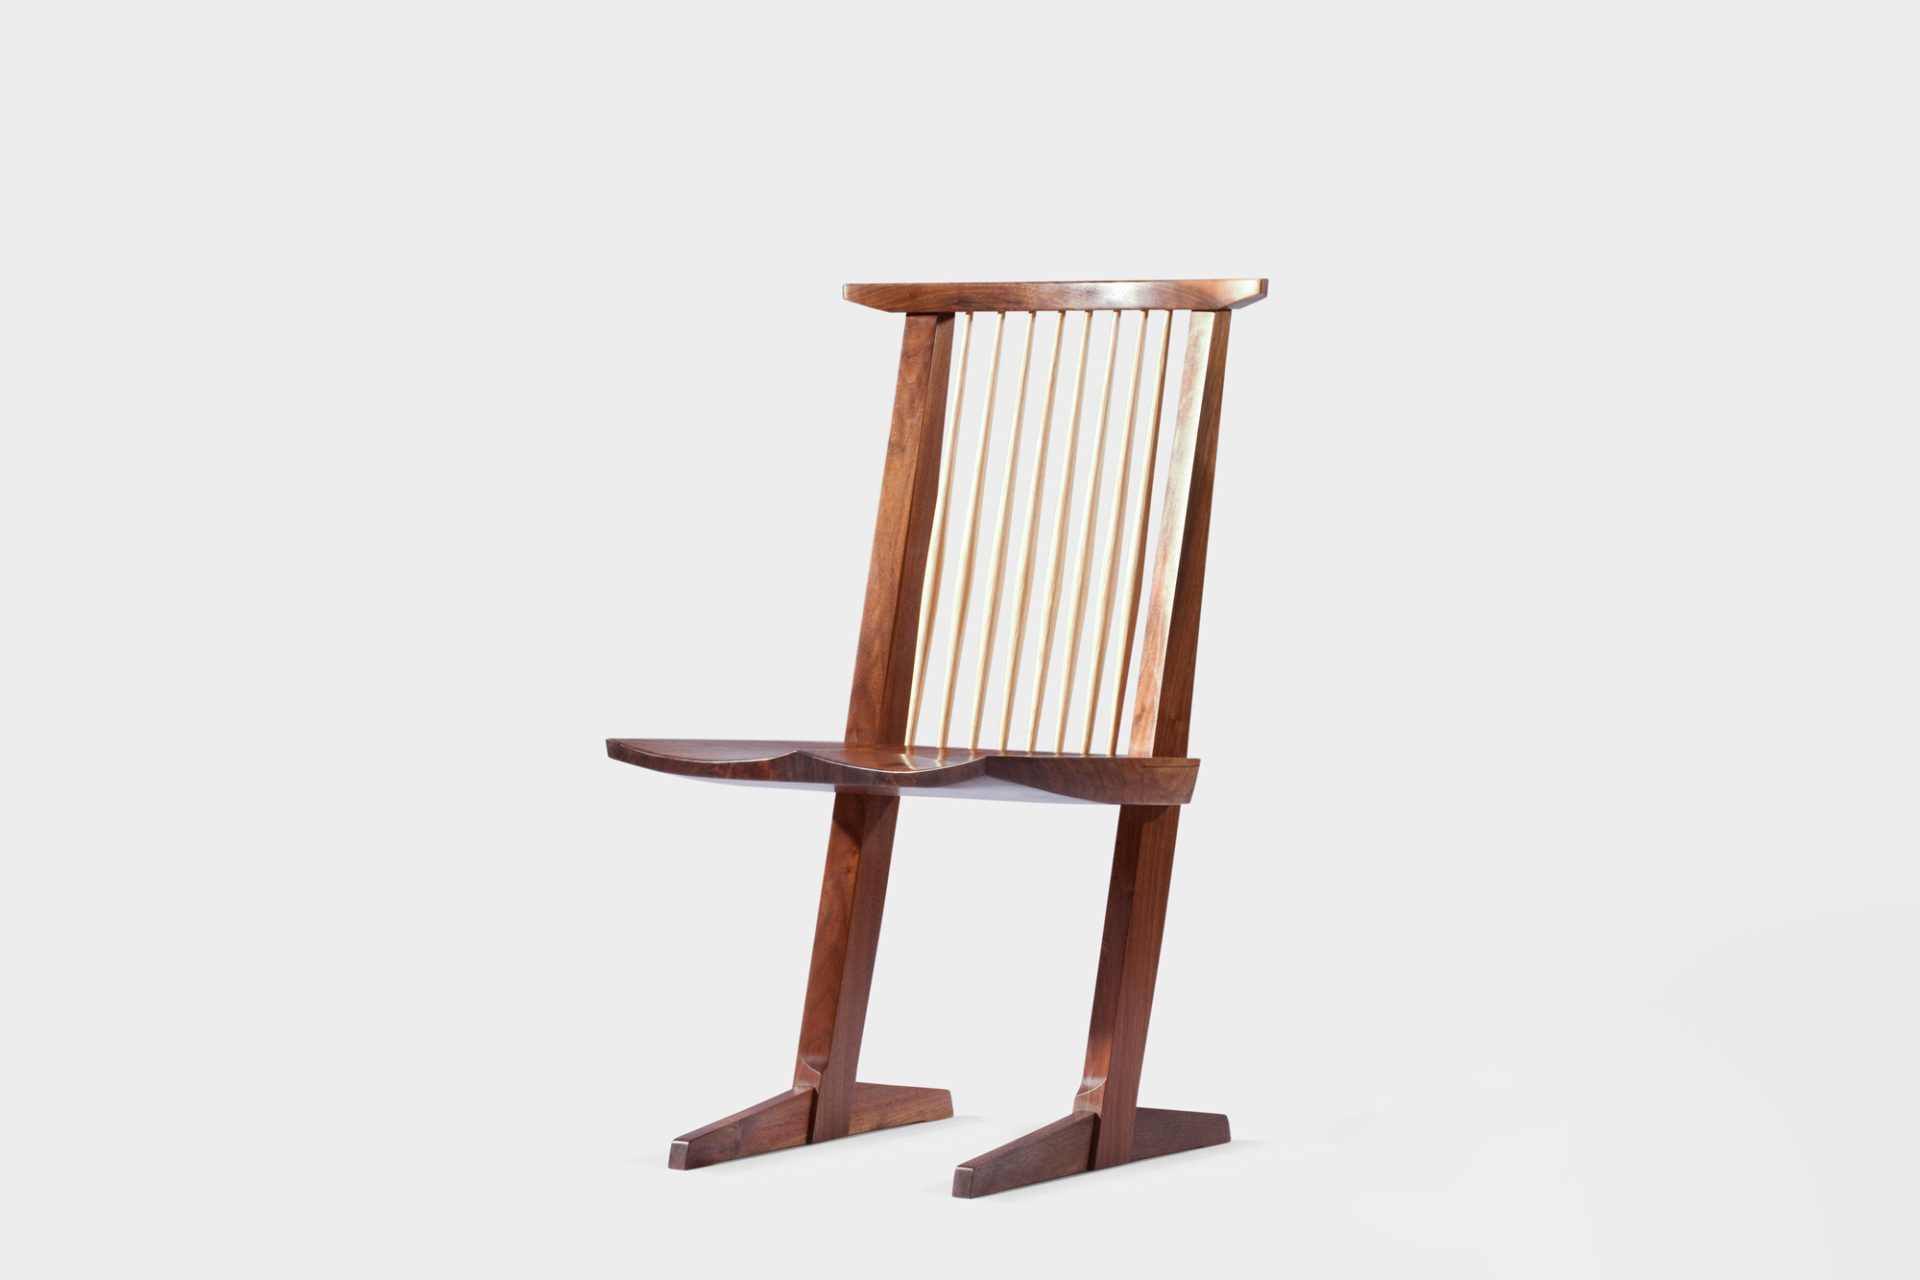 https://nakashimawoodworkers.com/wp-content/uploads/2018/05/Conoid-Chair-1-1920x1280.jpg